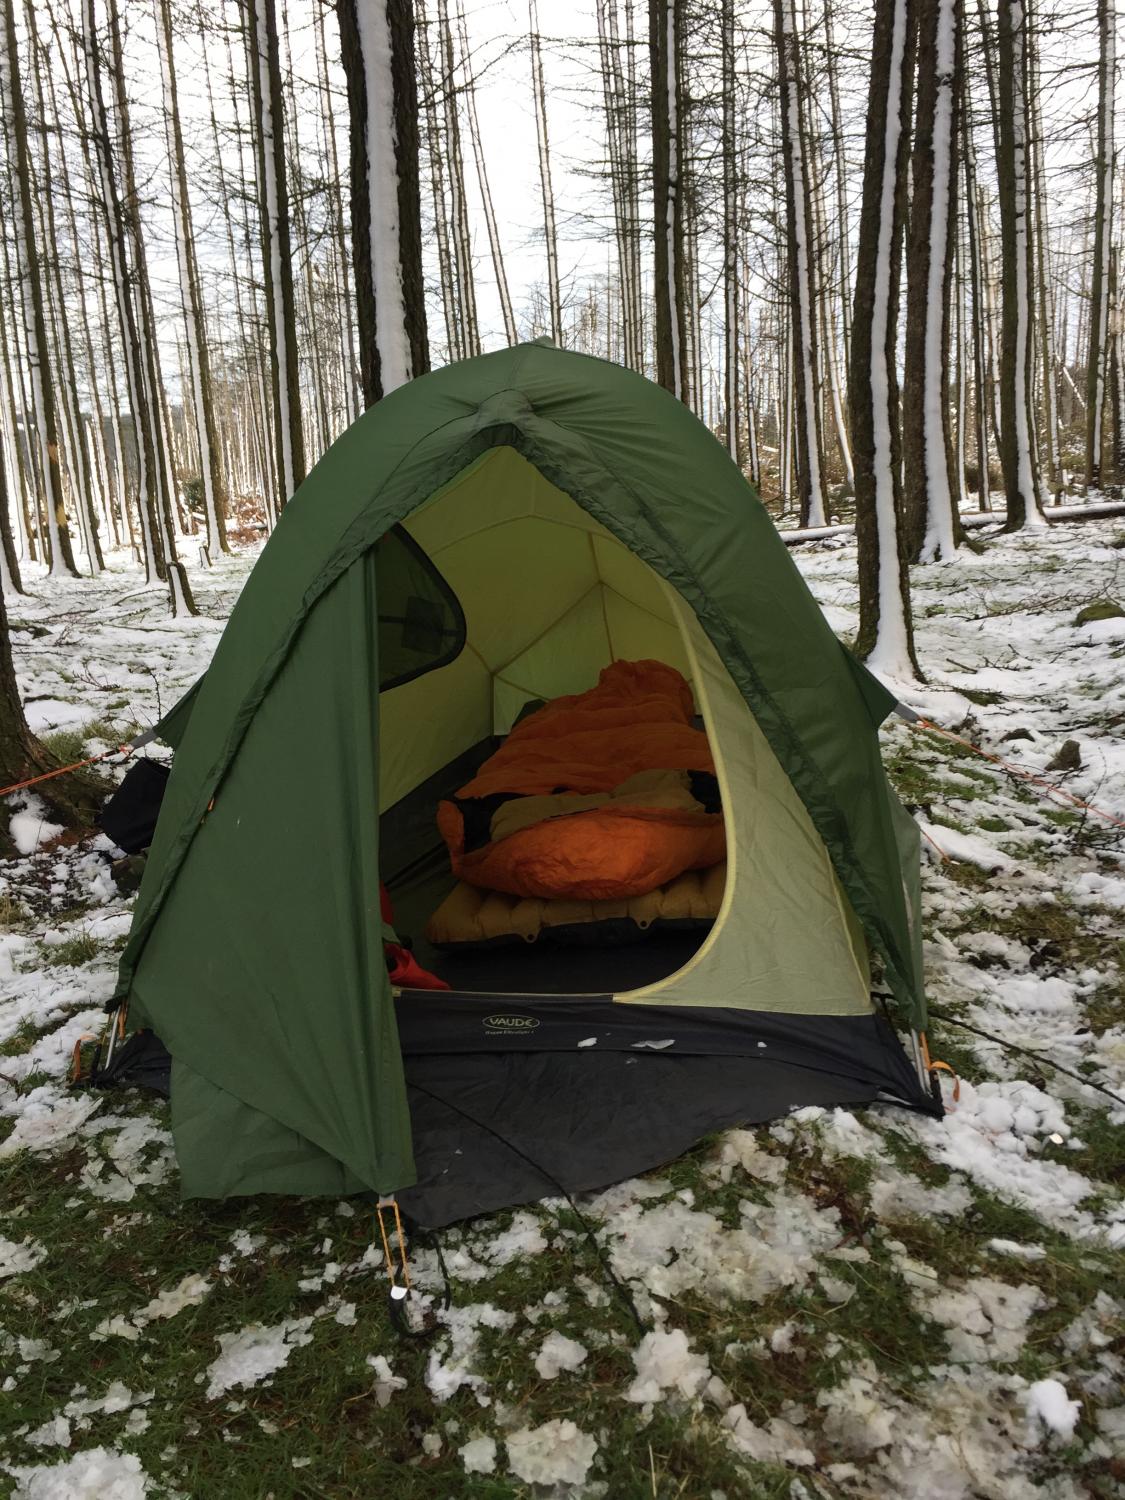 Northern Ireland Outdoors Forum - Hiking, camping and more - Tent